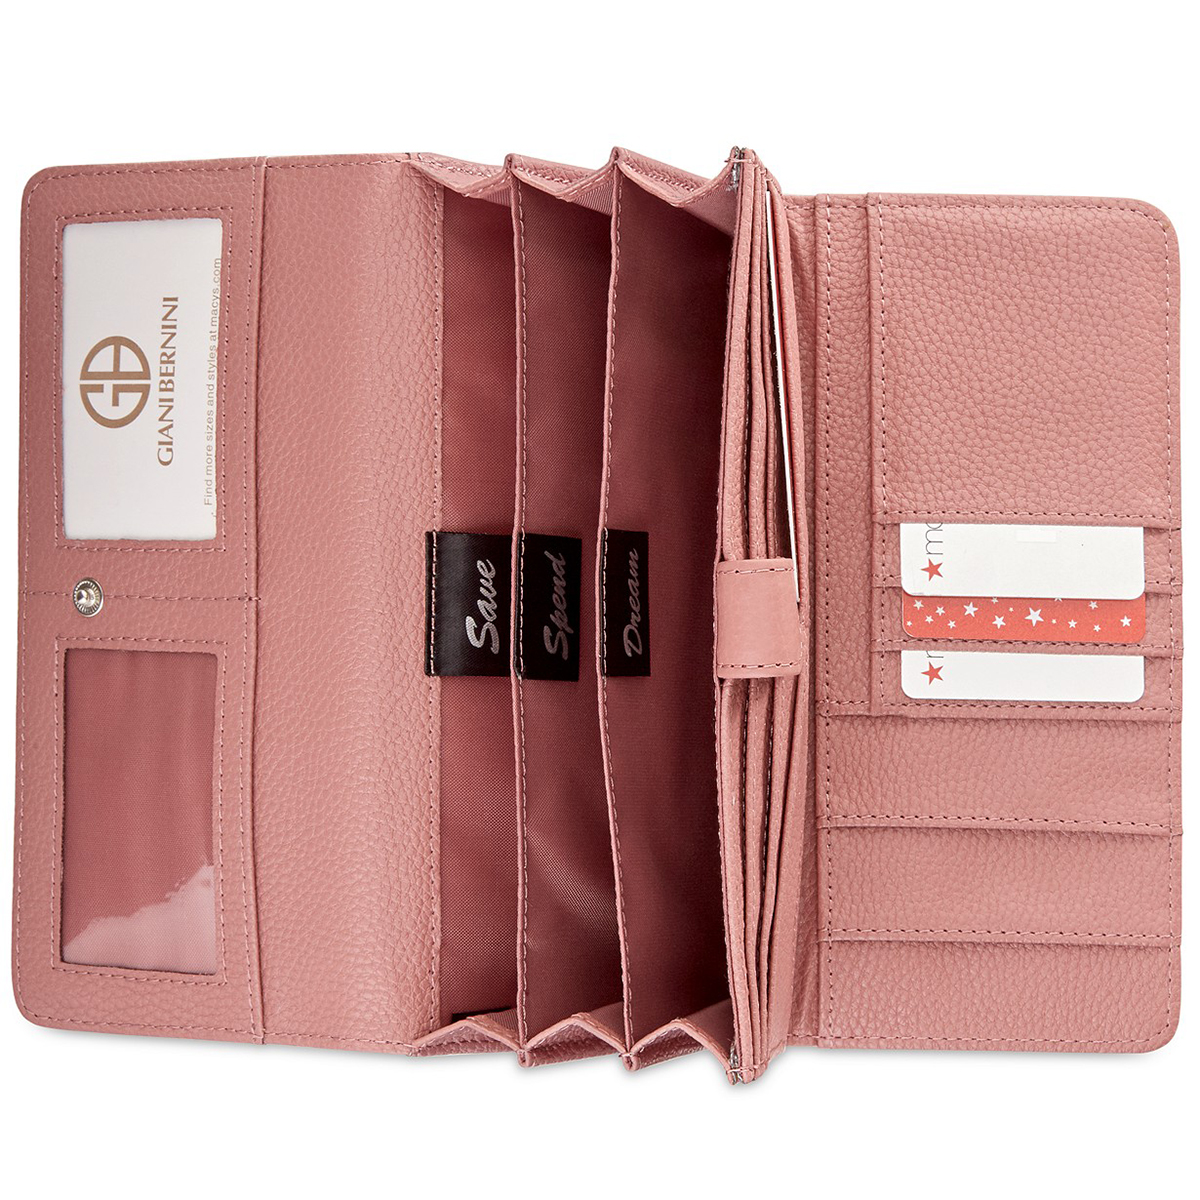 Organization Has Never Been So Easy With This 40%-Off Wallet